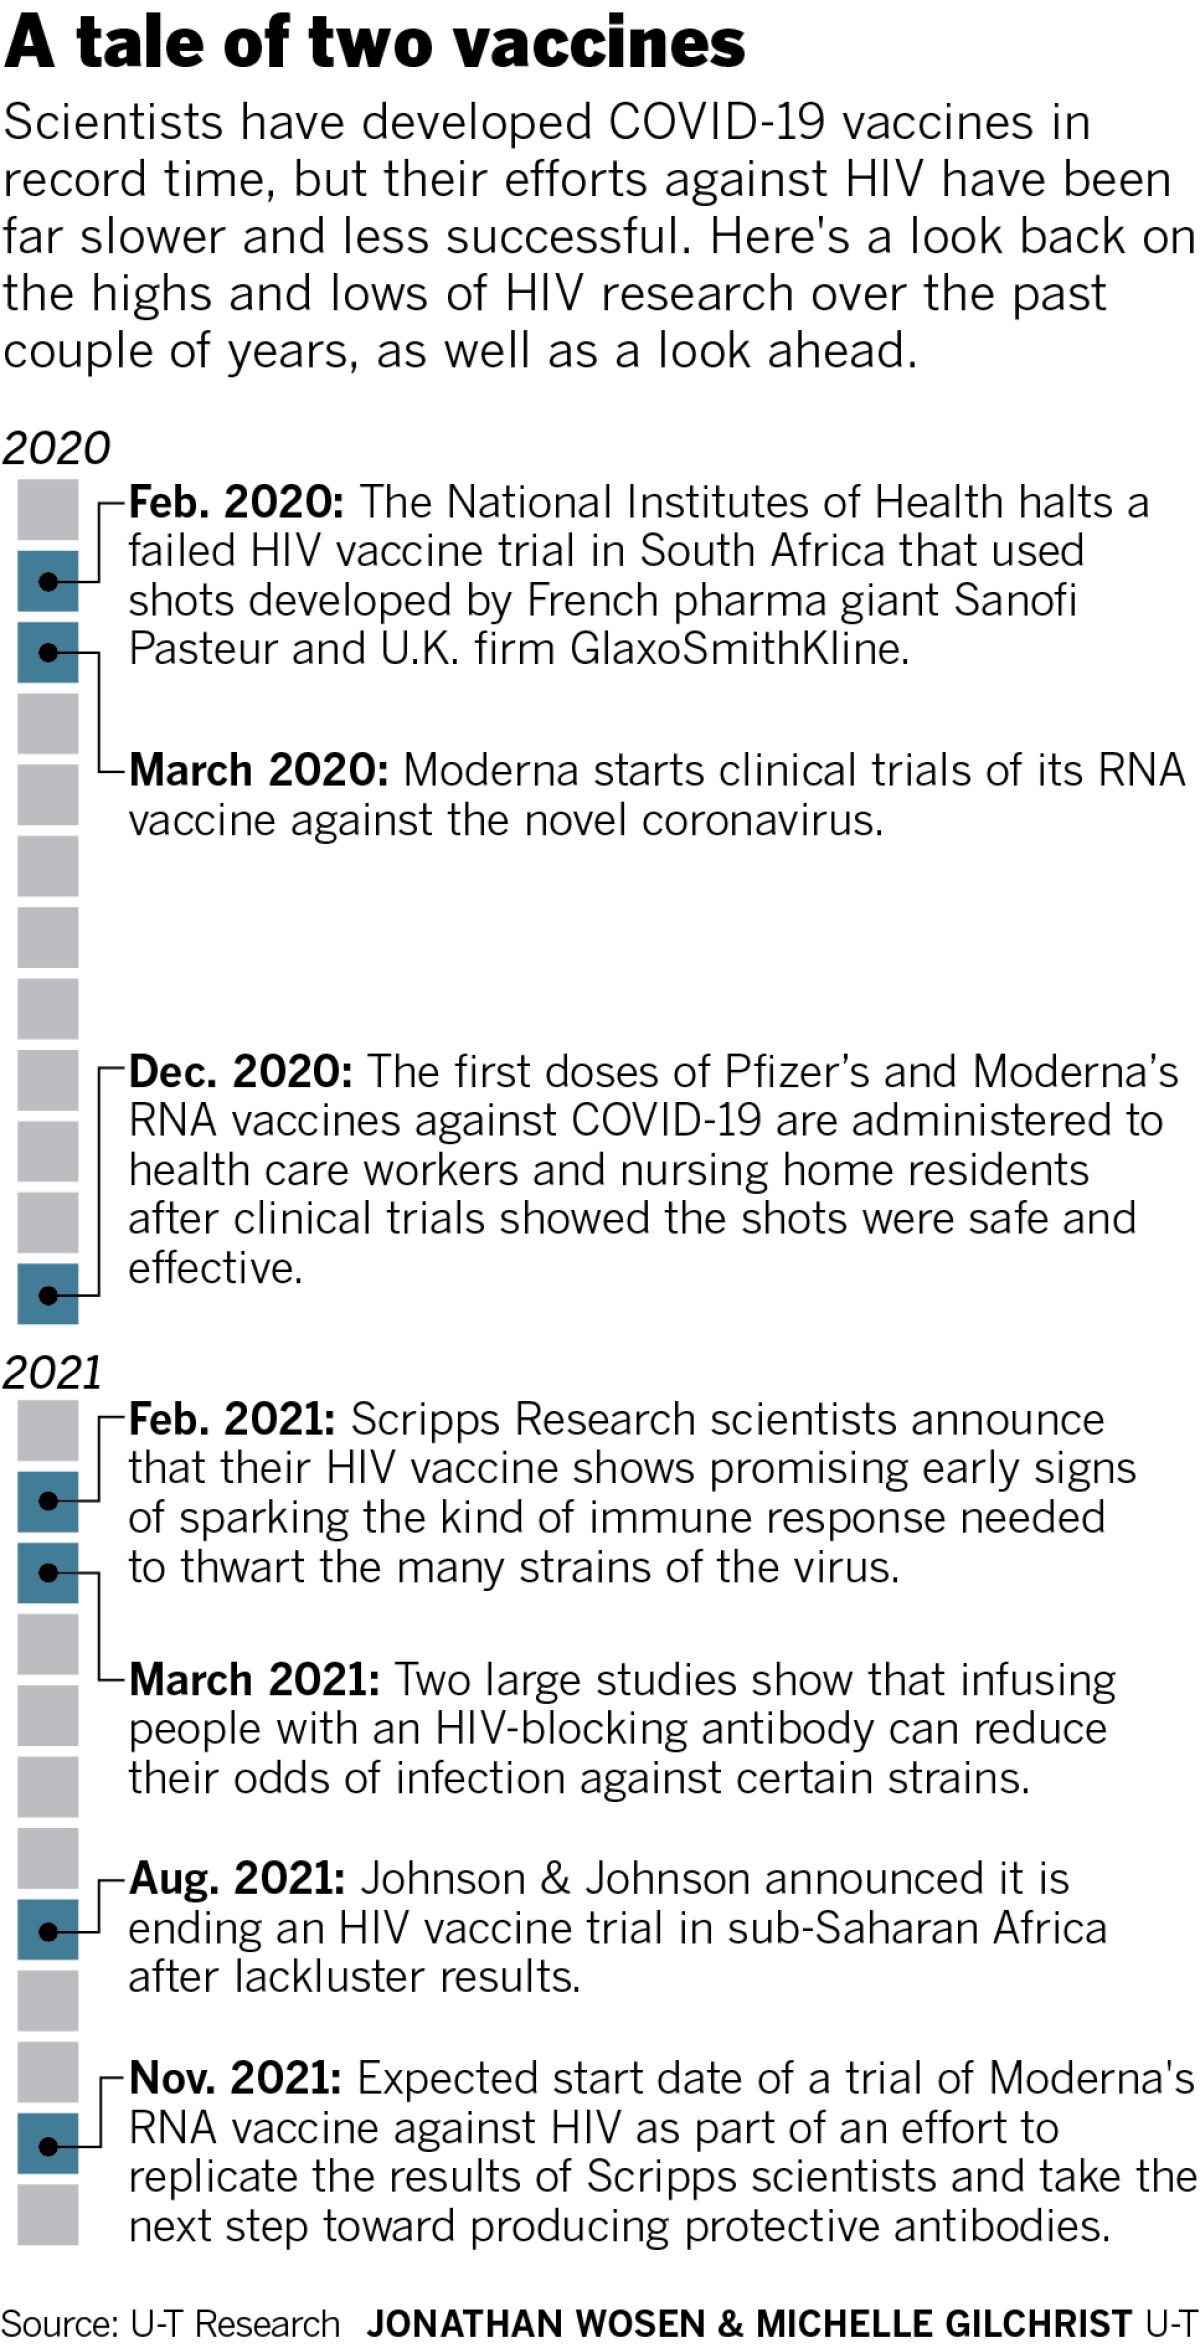 A tale of two vaccines, HIV and COVID-19